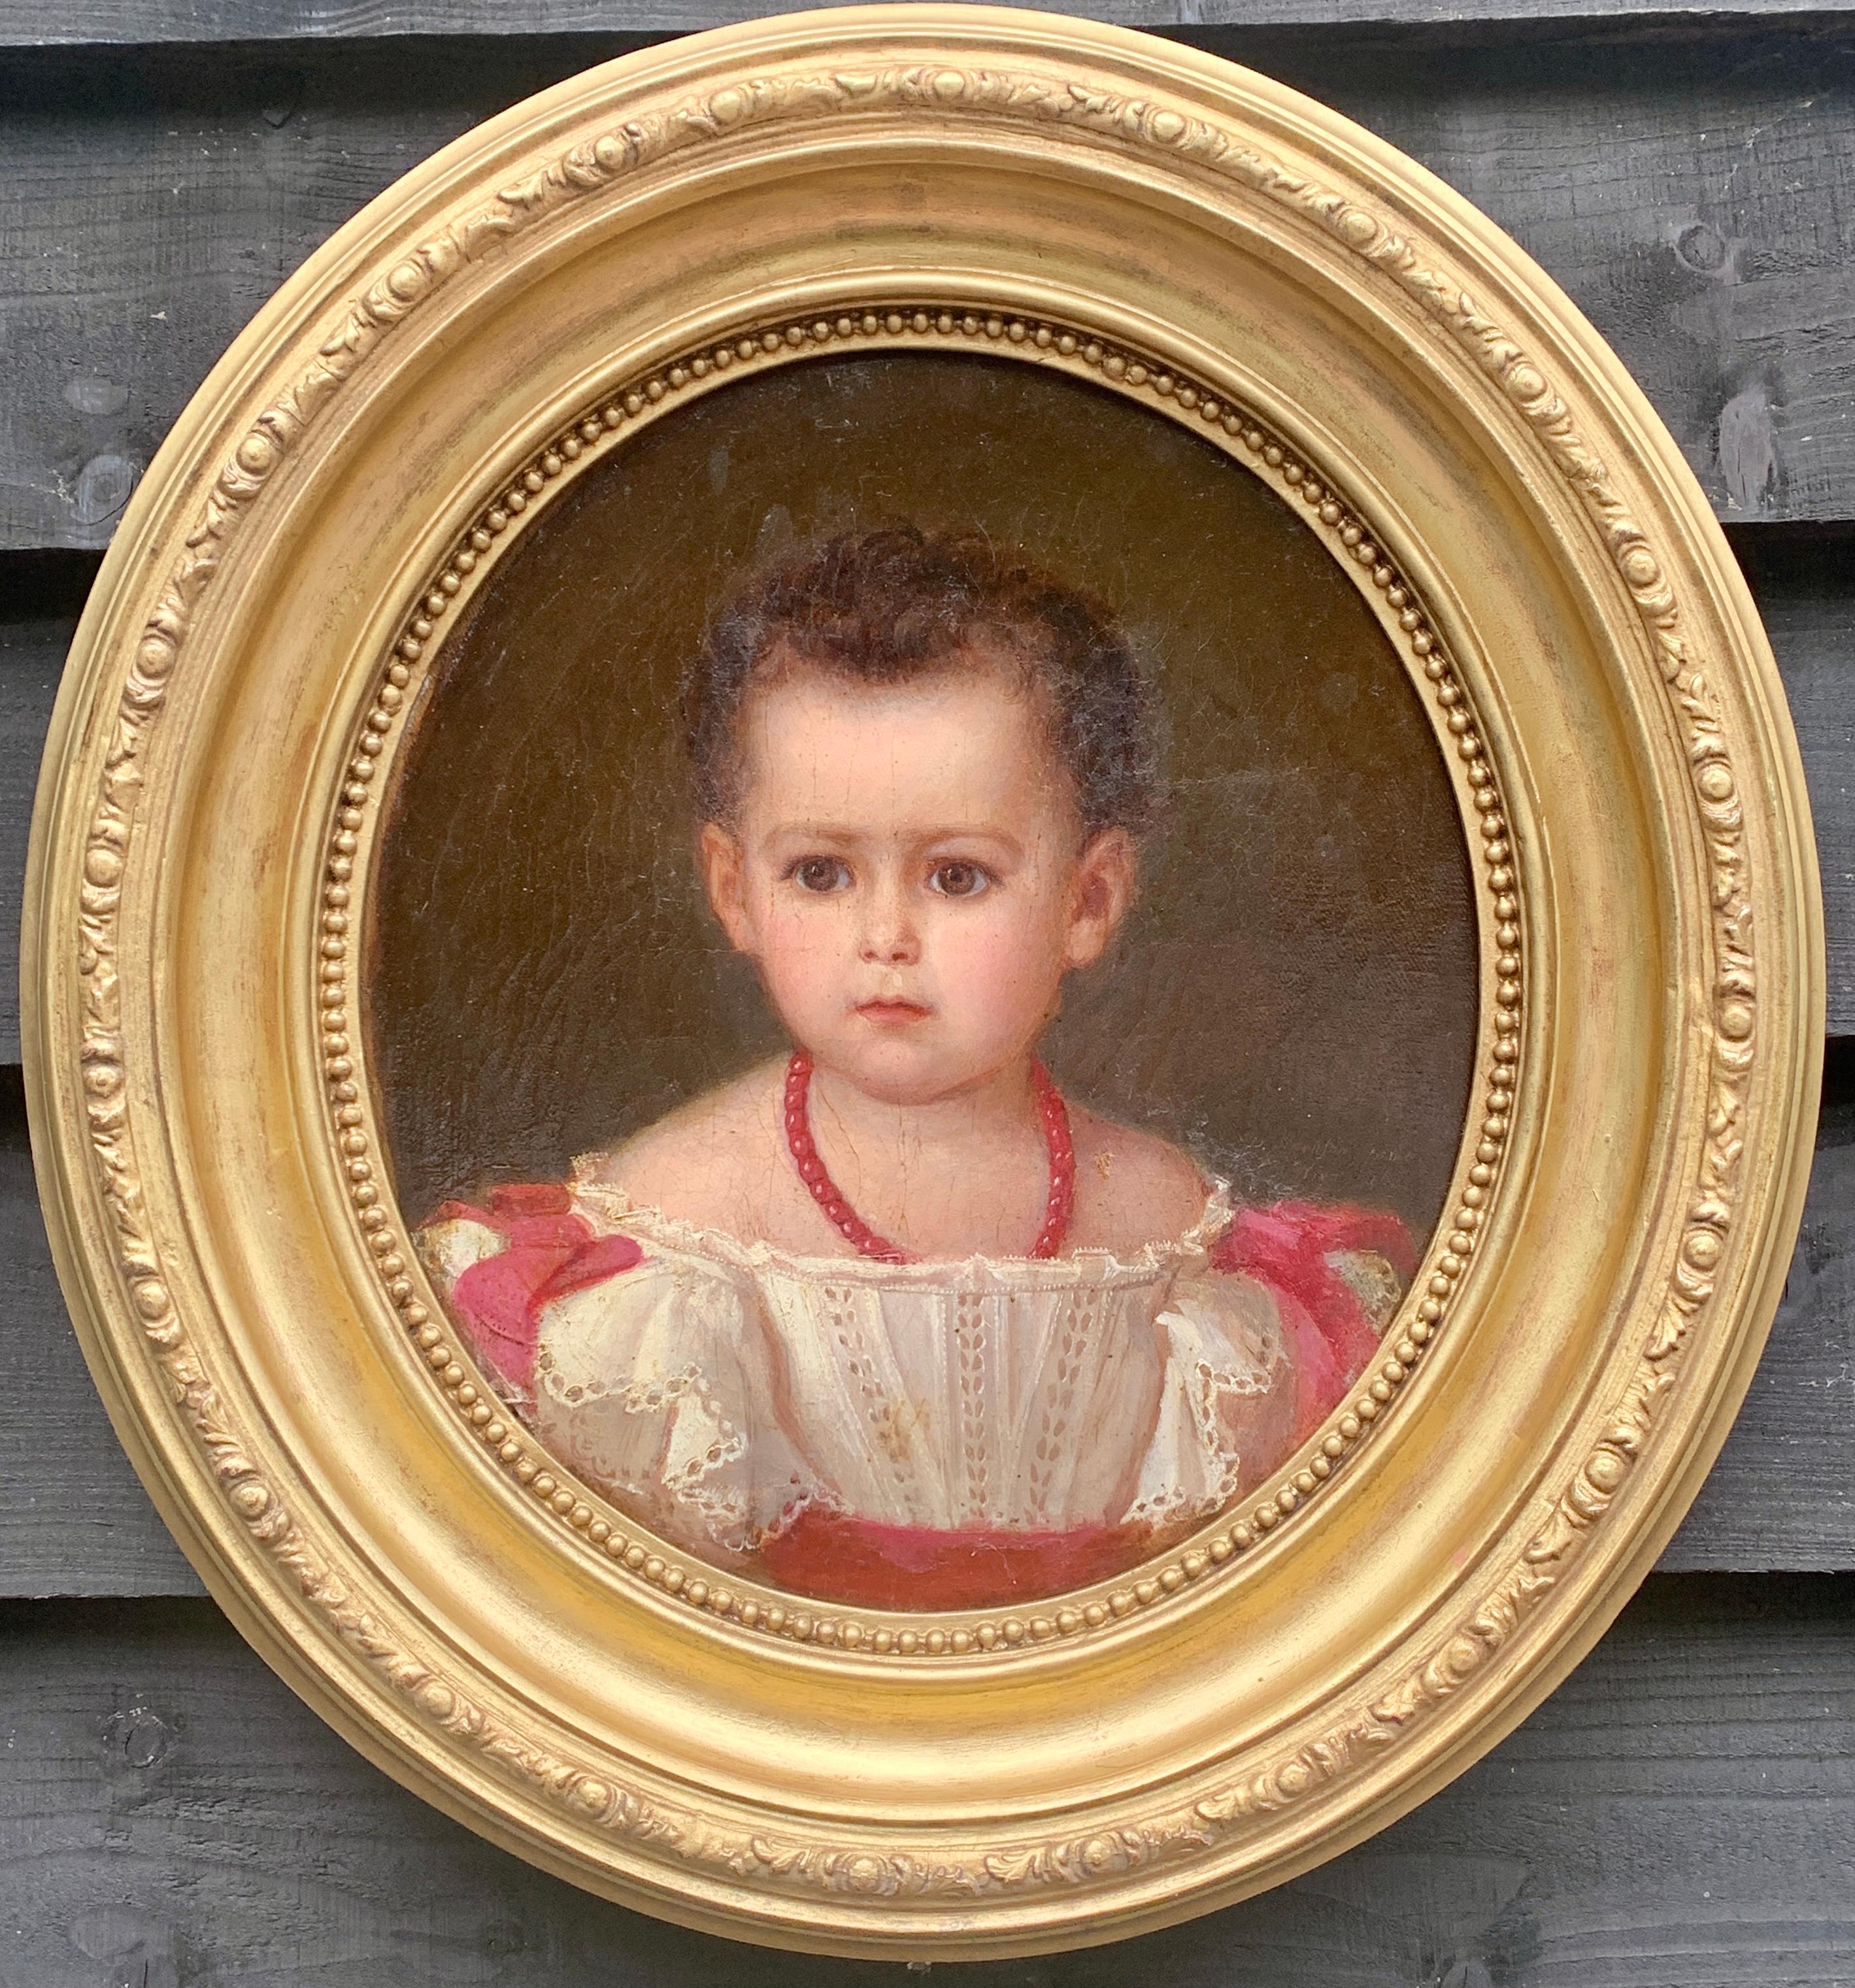 19th century Austrian Portrait of a young girl in white dress with Red bows